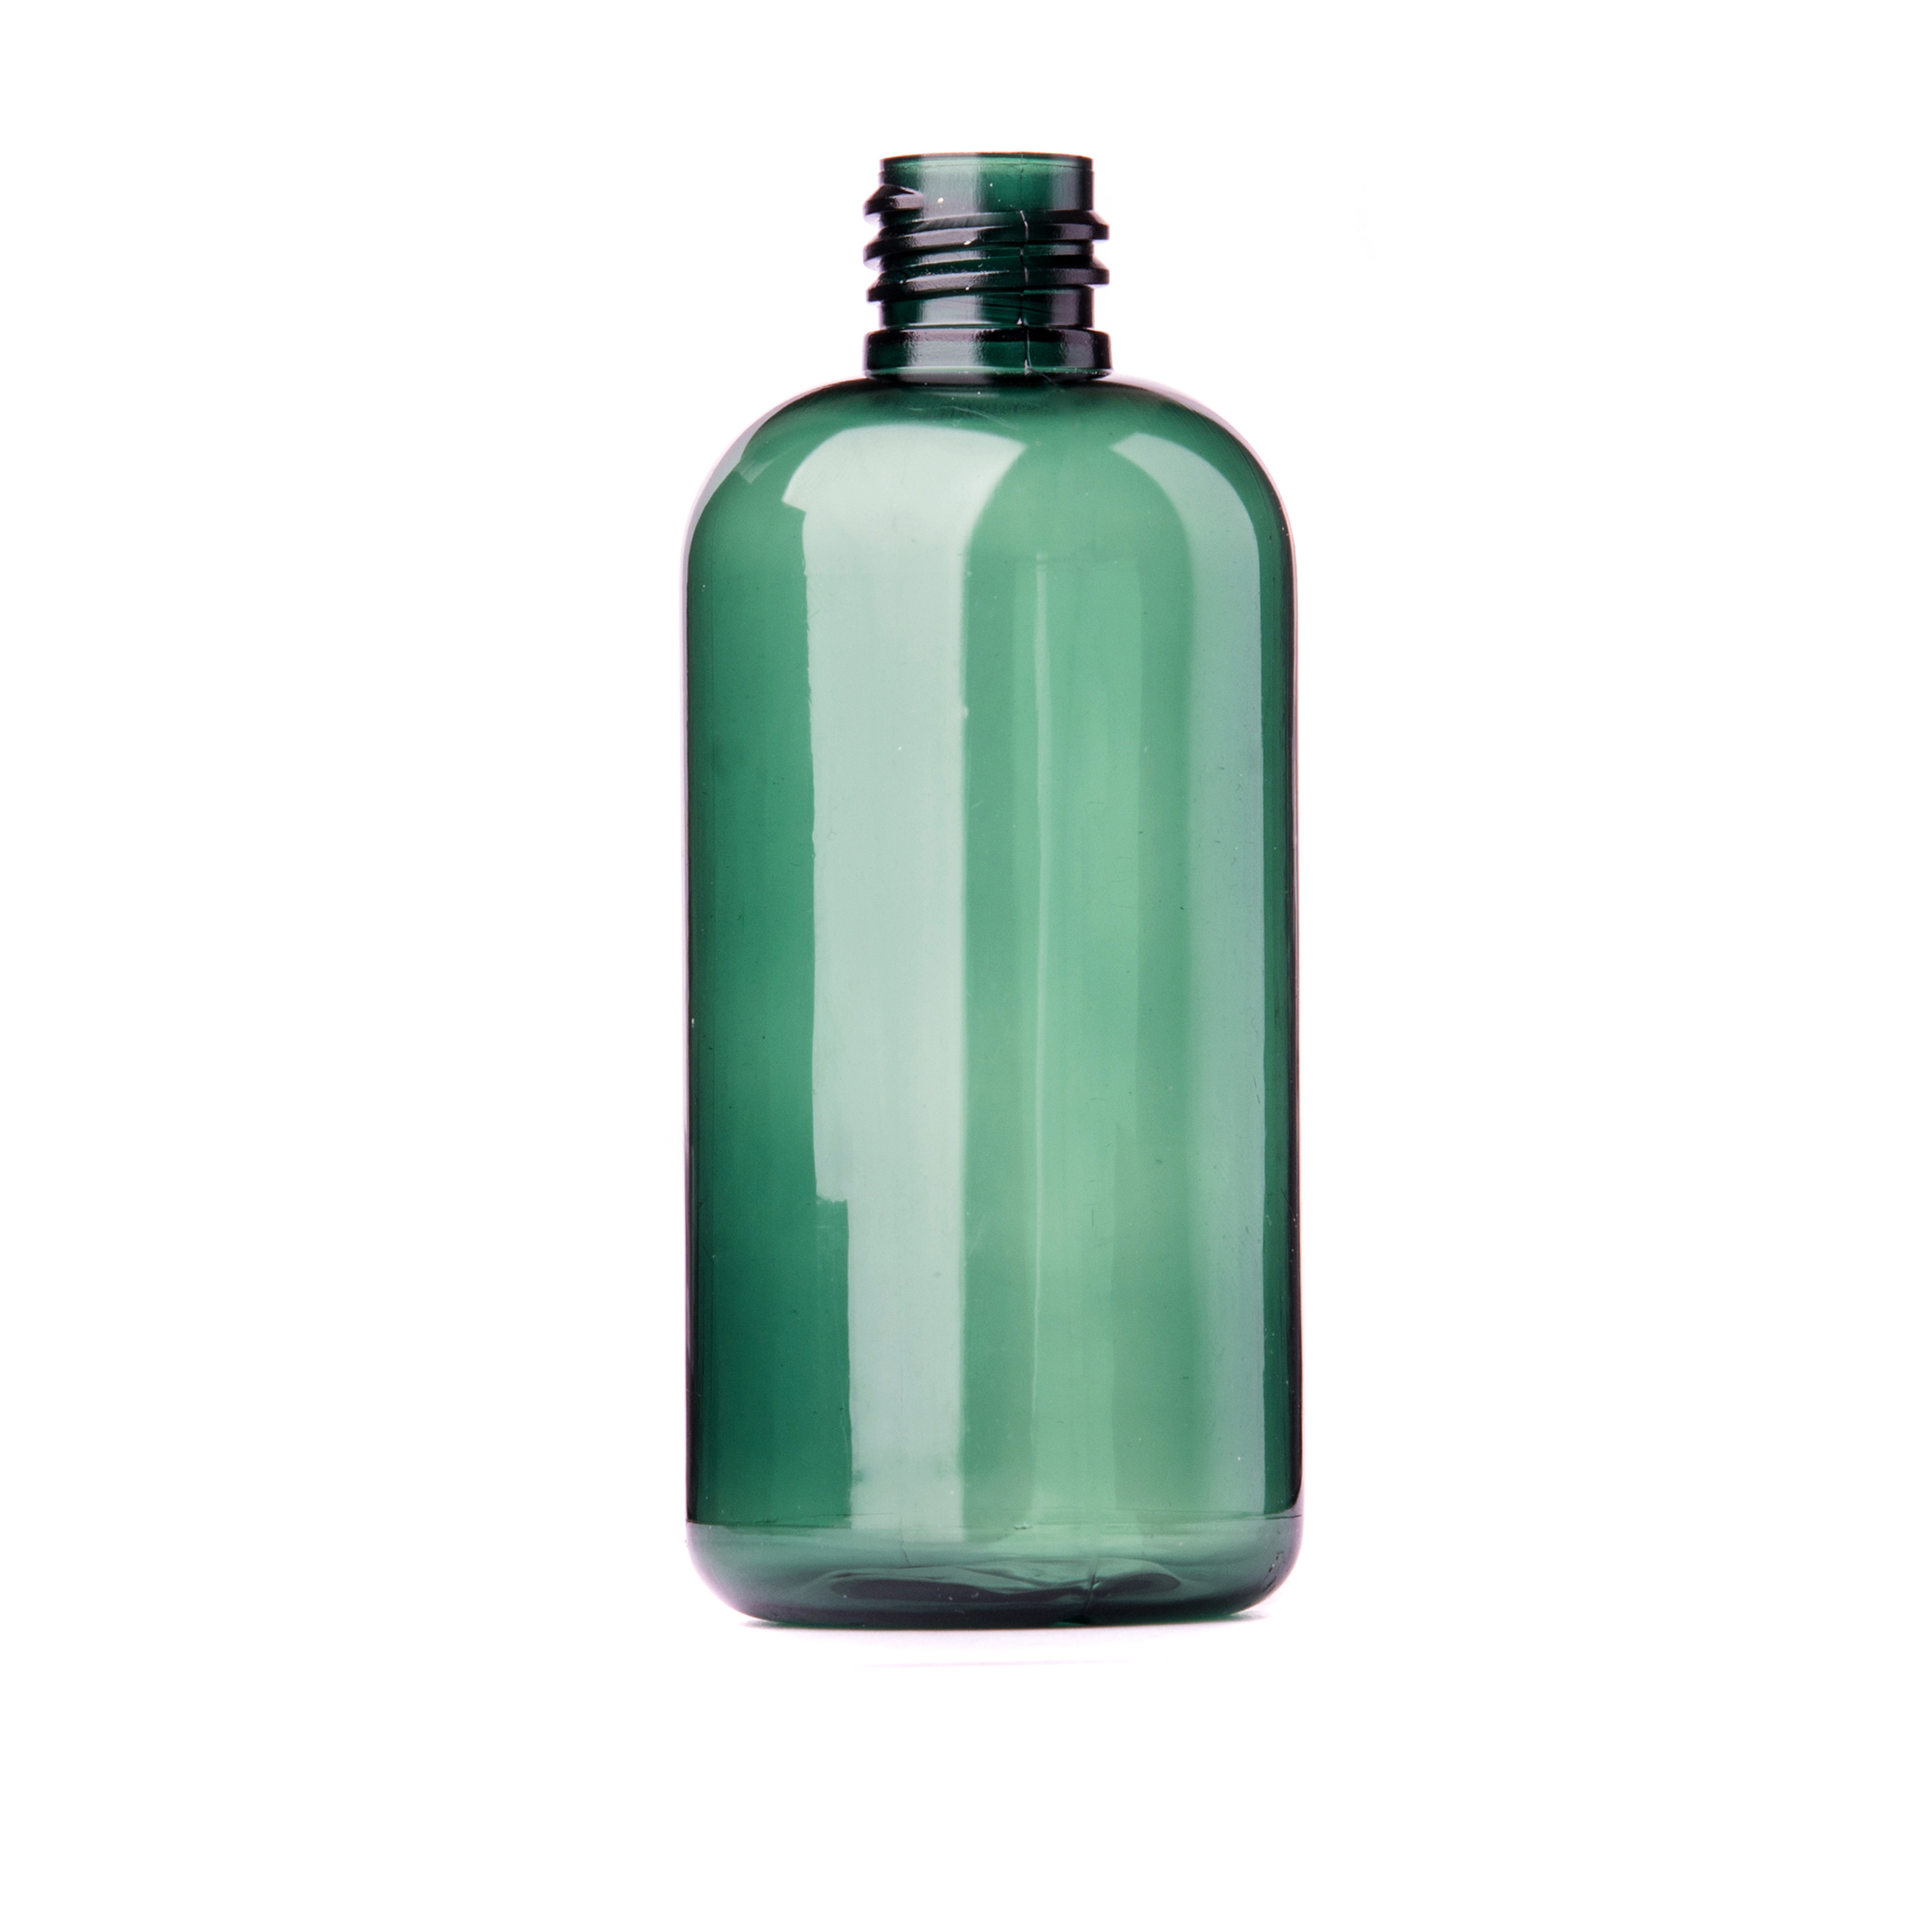 Images of Bottles | 2210x2210